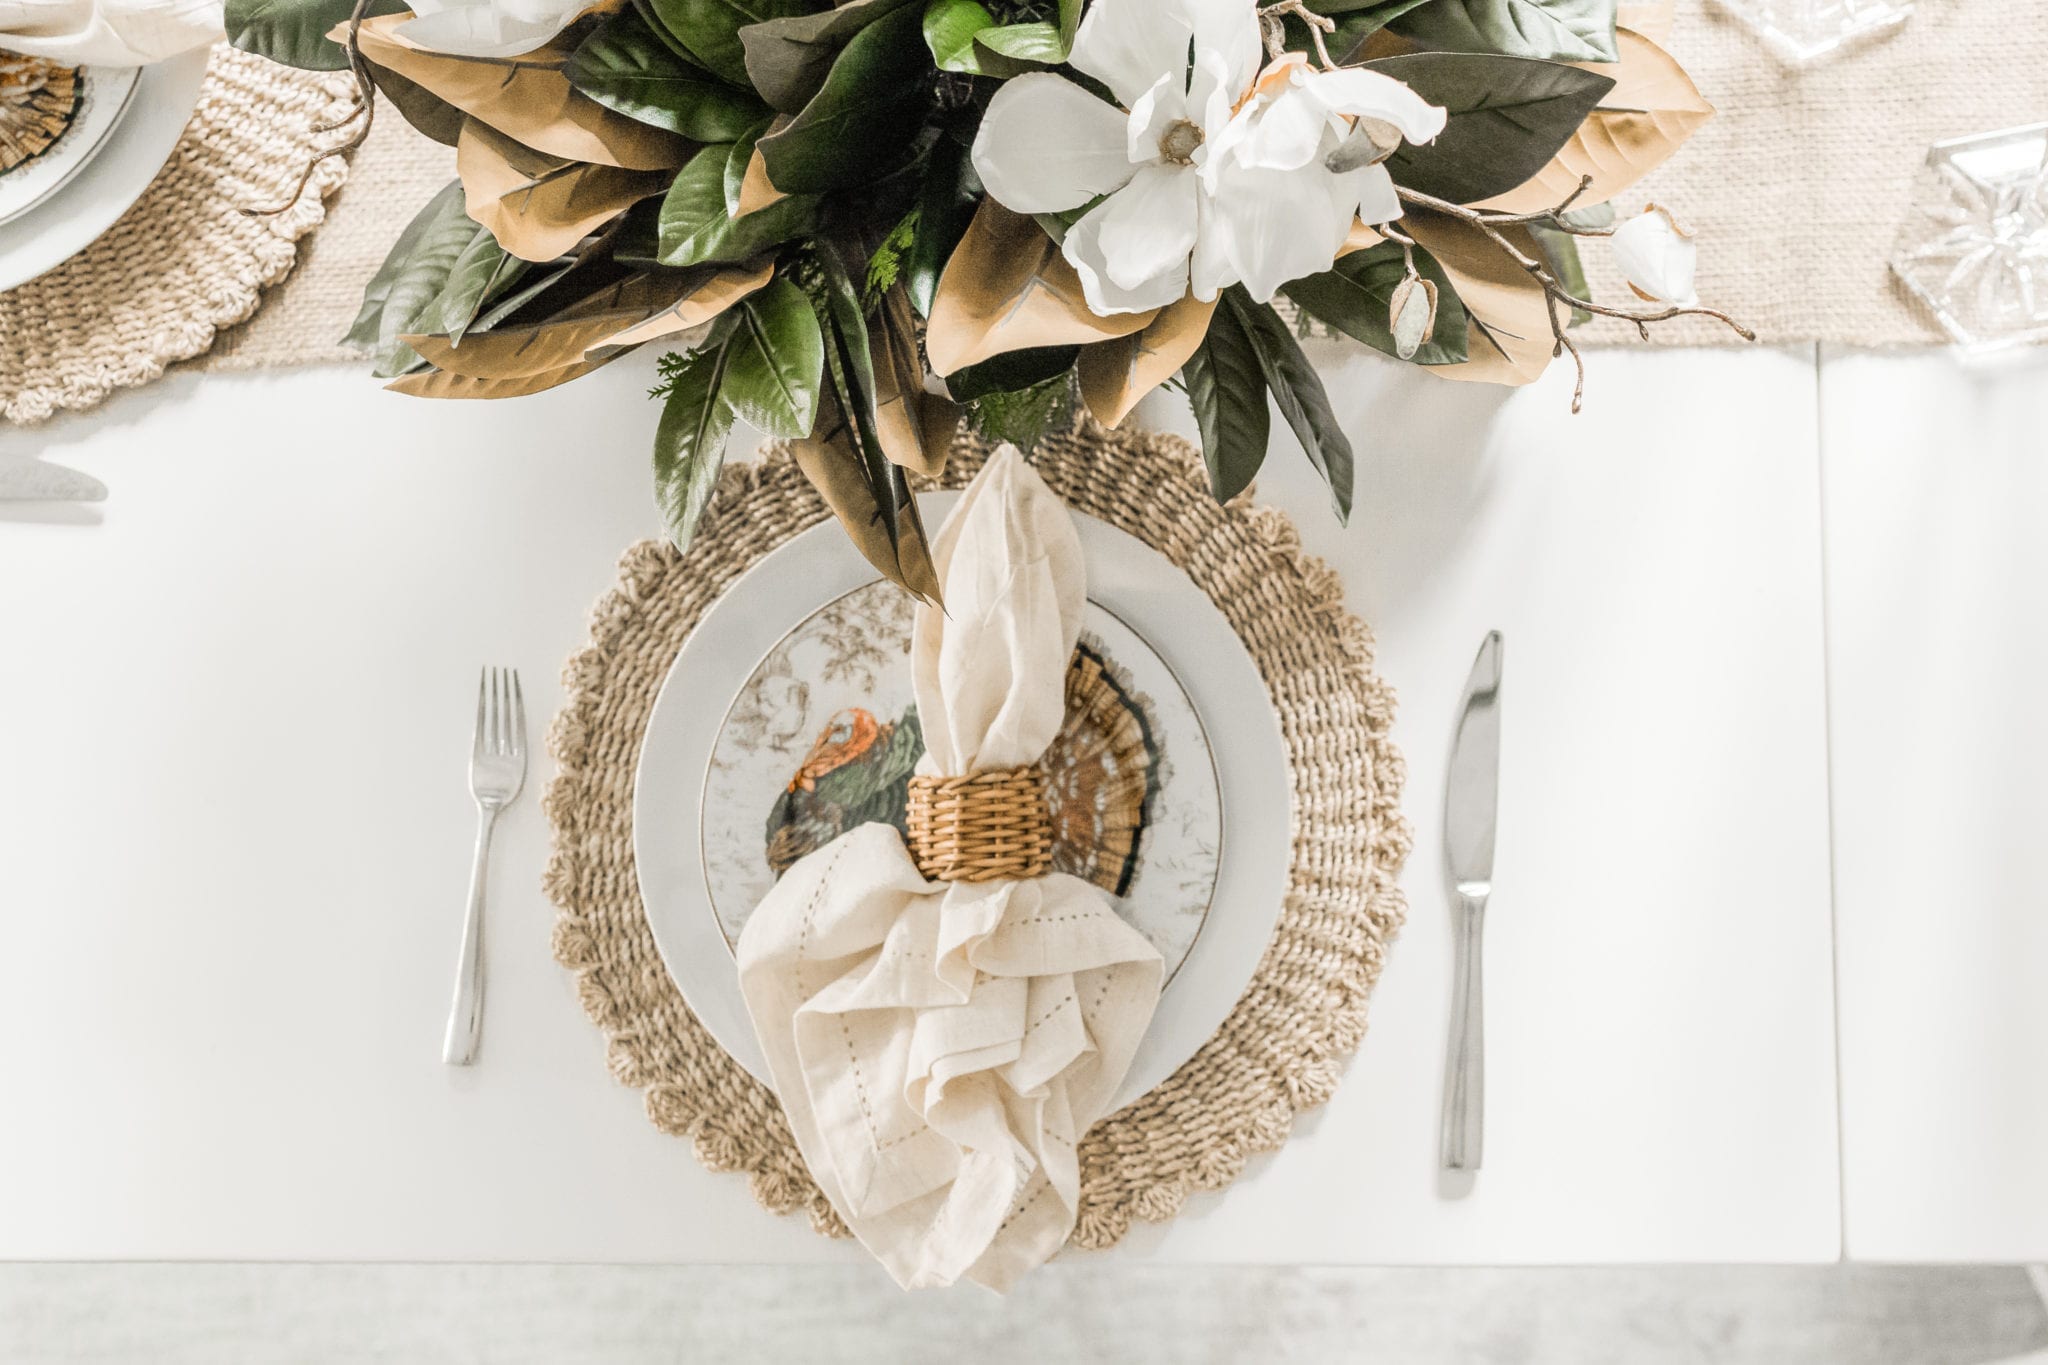 Wicker Placemat mixed with Williams Sonoma Thanksgiving plates, linen napkins and wicker napkin ring.